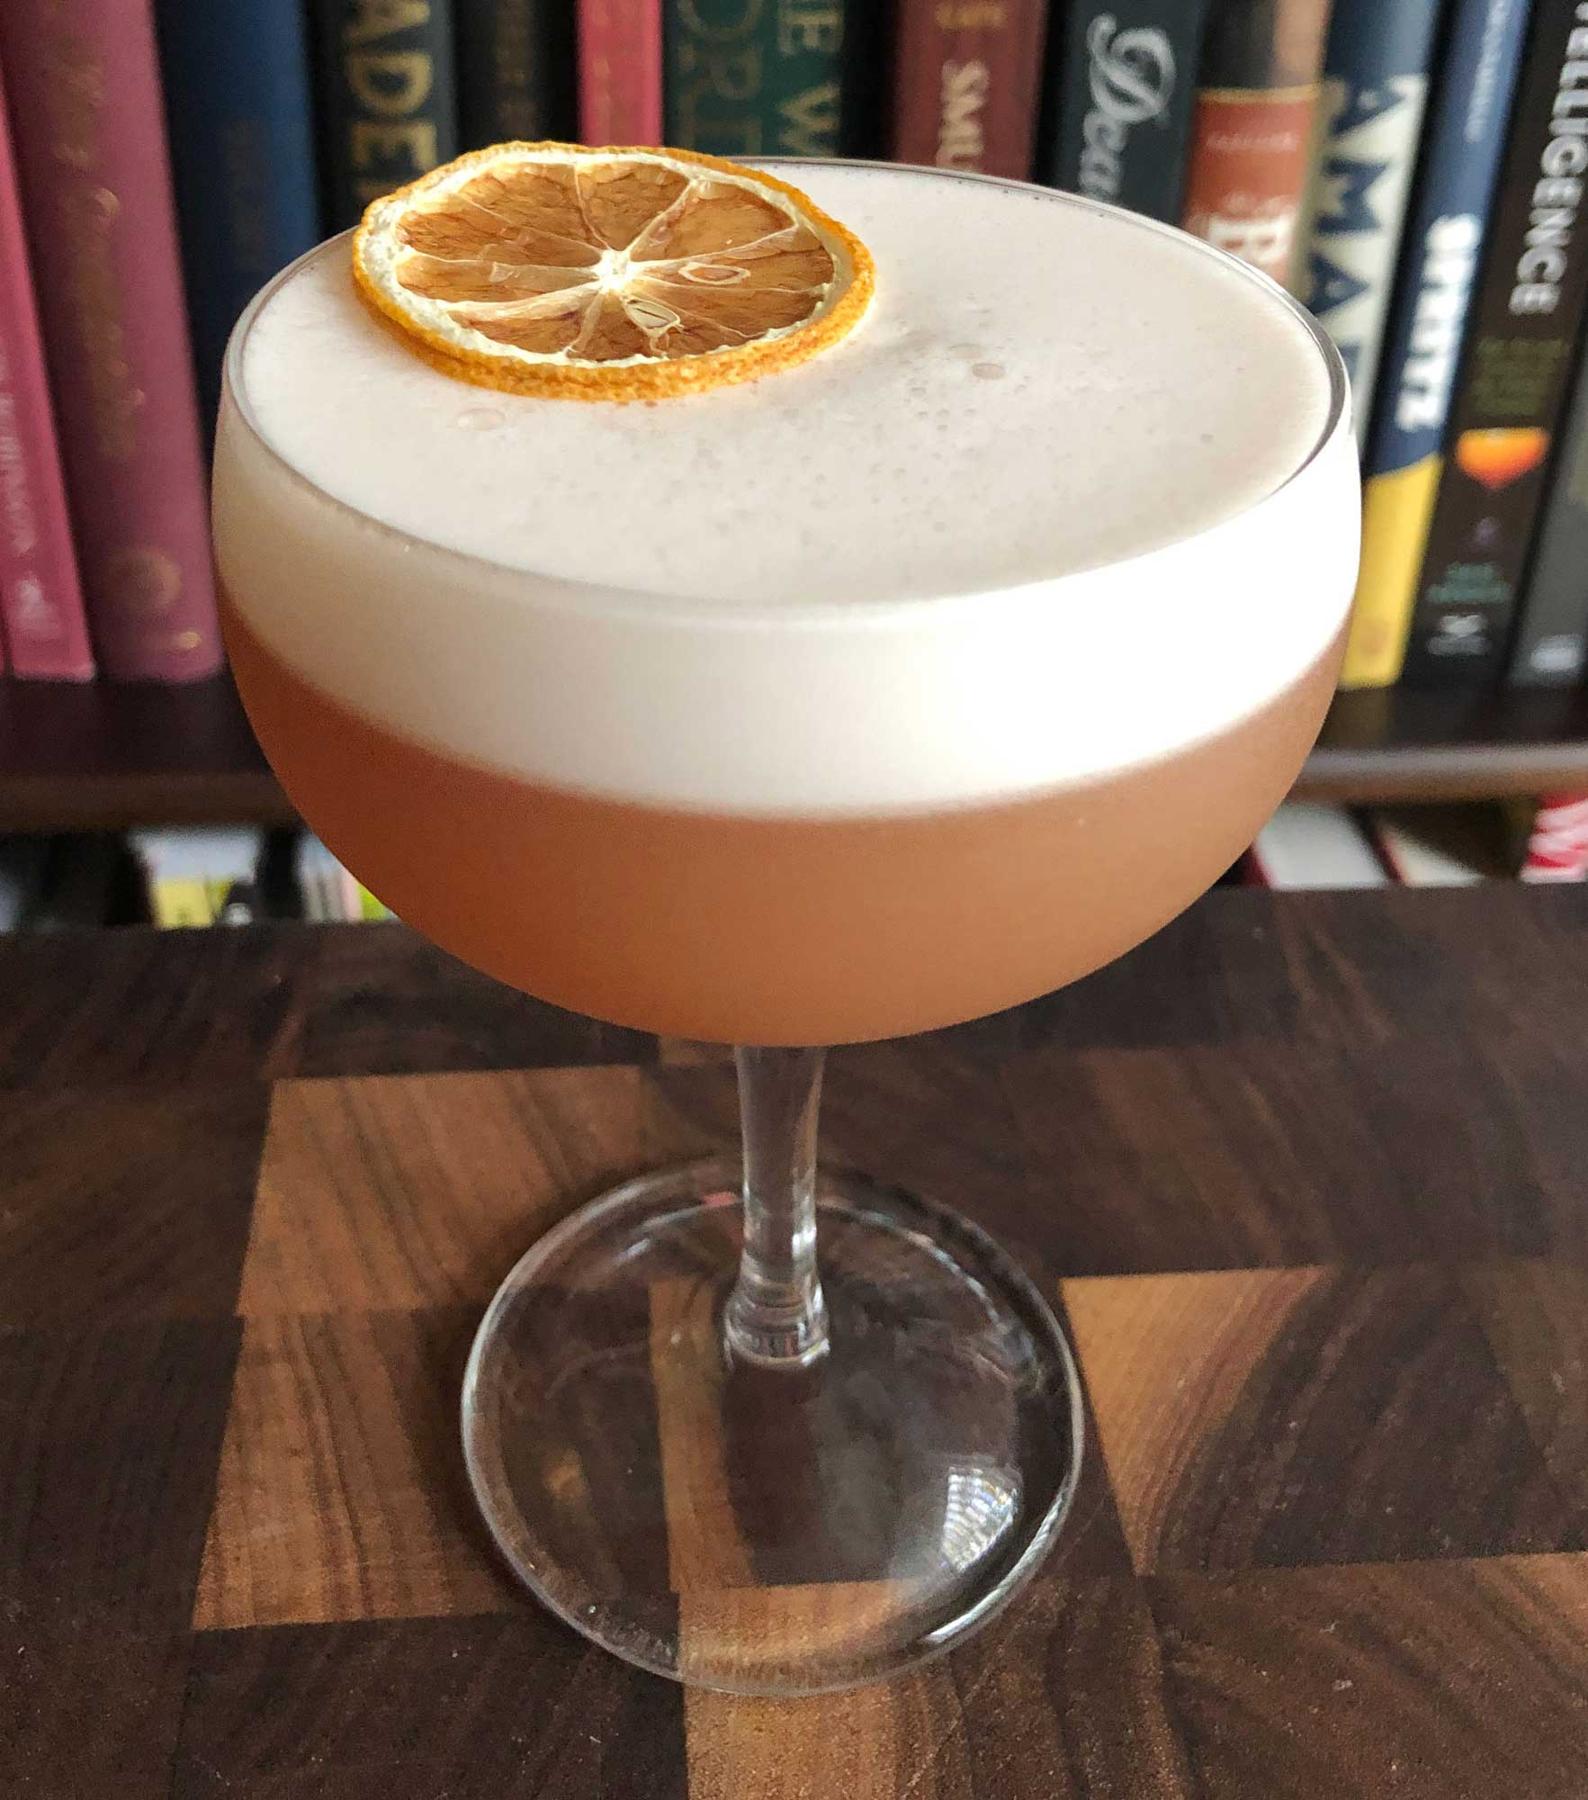 An example of the Savoy Tango Sour, the mixed drink (drink), variation of a drink from the Savoy Cocktail Book, featuring lemon juice, egg white, Hayman’s Sloe Gin, apple brandy, and simple syrup; photo by Lee Edwards